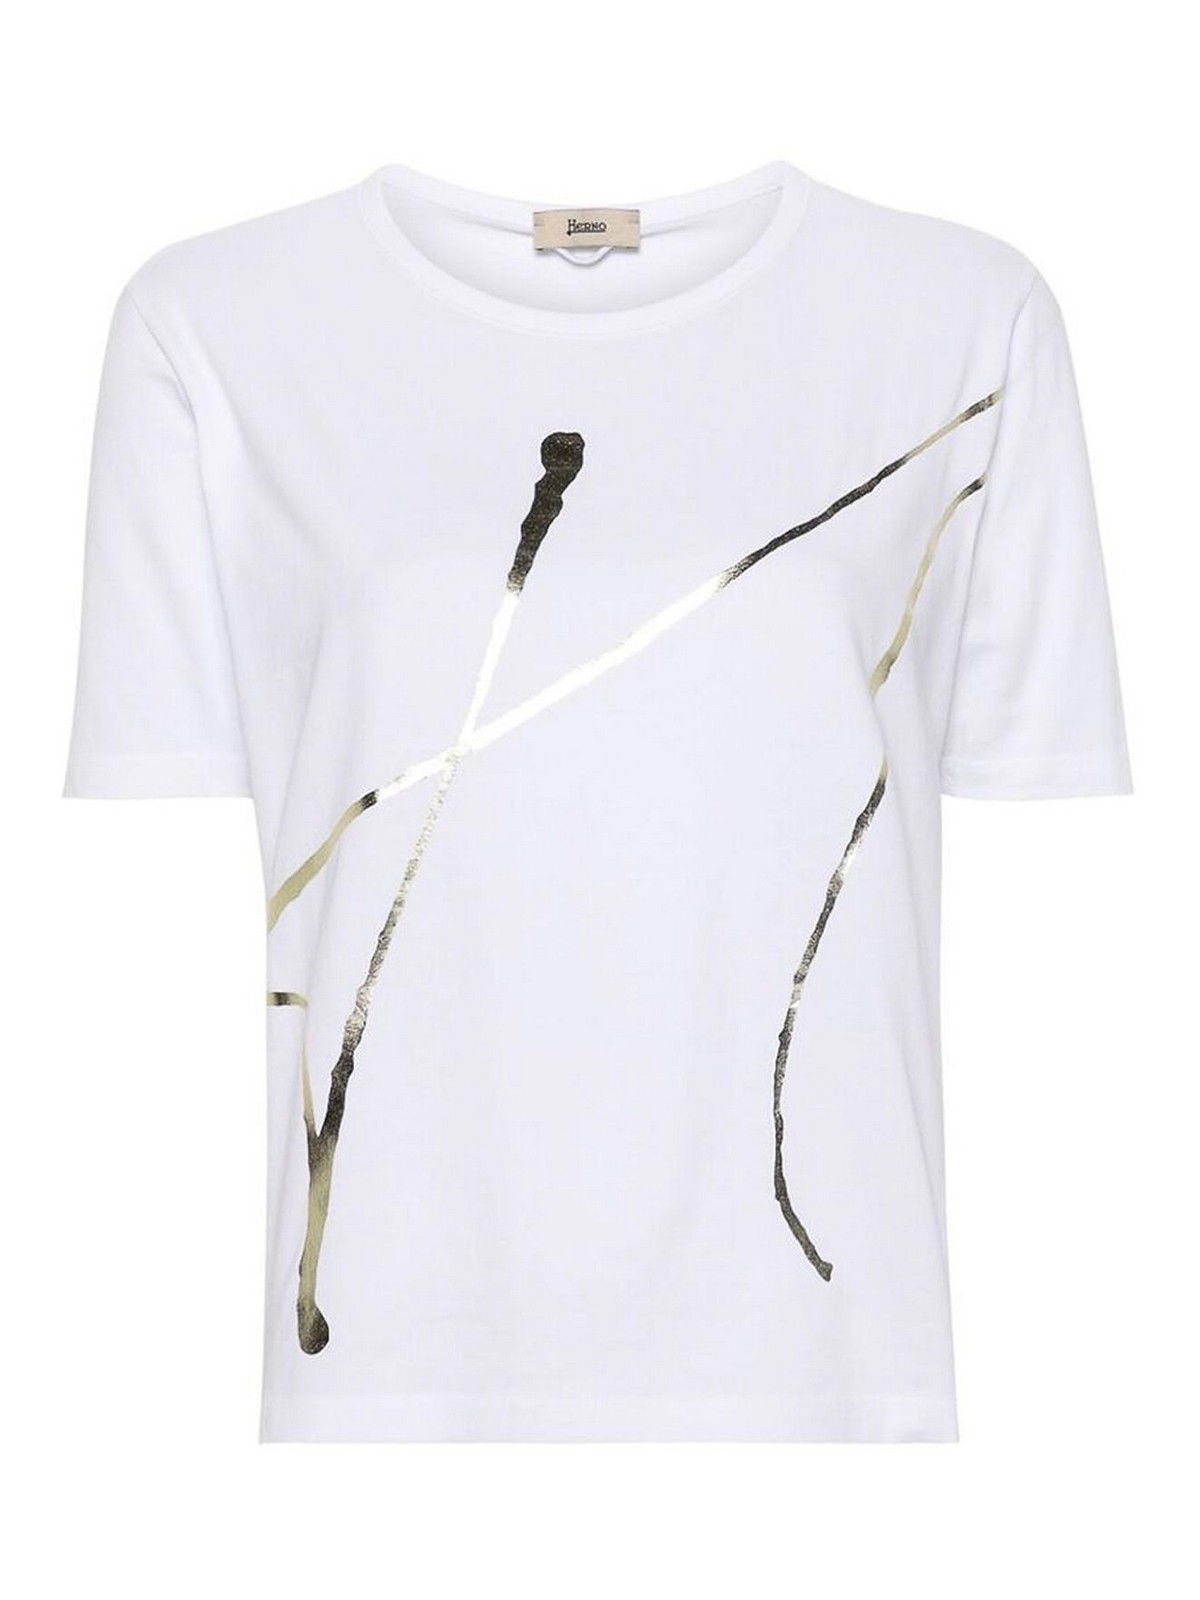 Herno Graphic Print T-shirt In White